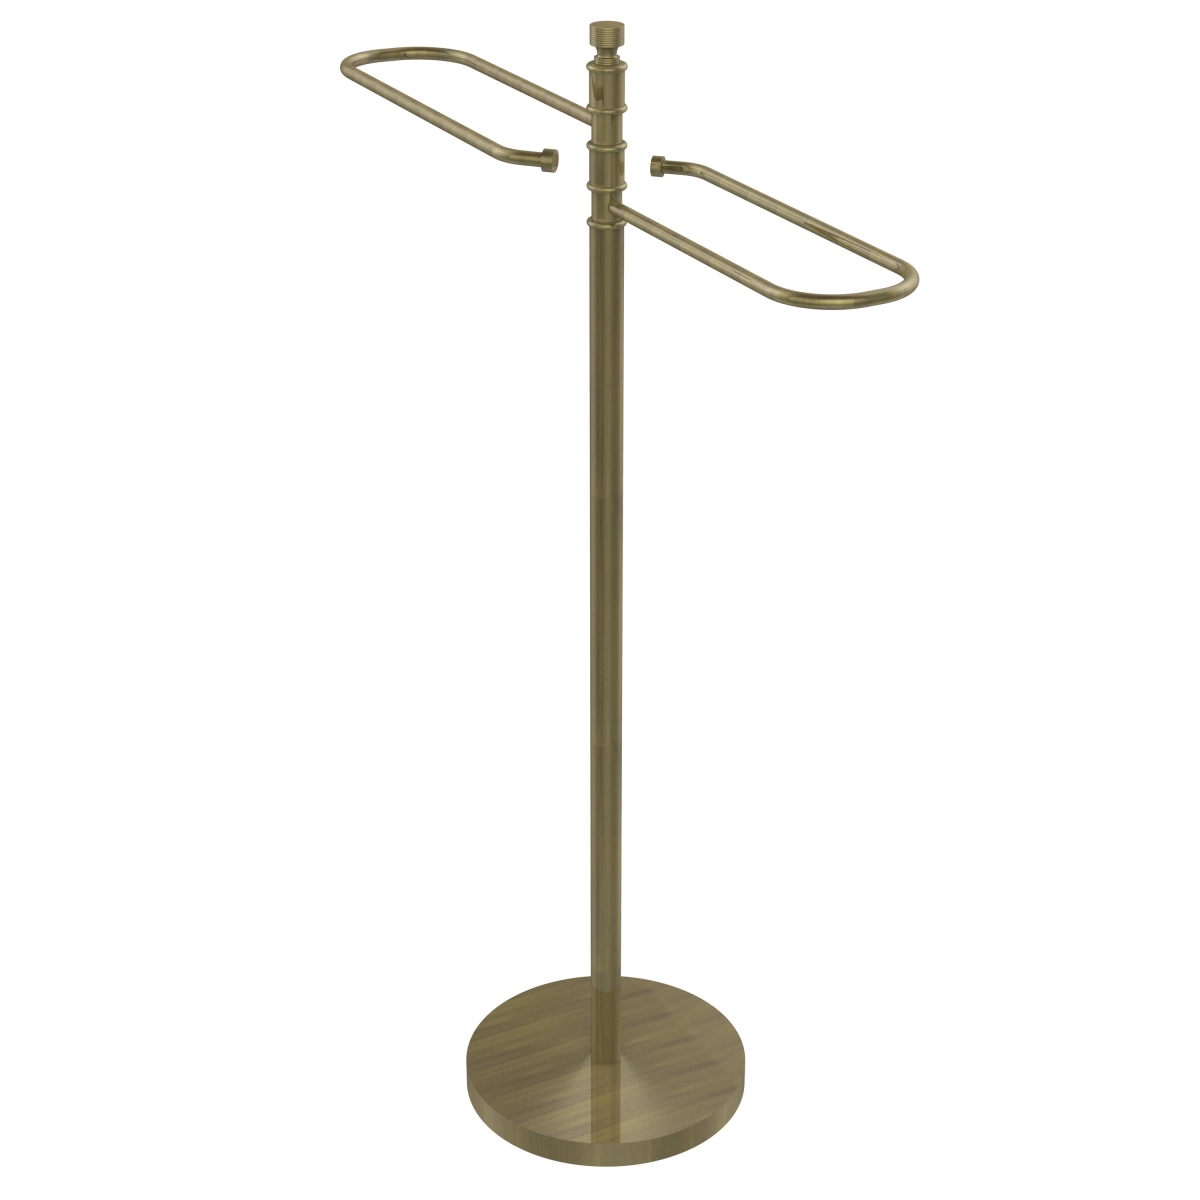 Allied Brass TS-8-ABR Contemporary Free Standing Floor Bath Towel Valet, Antique Brass